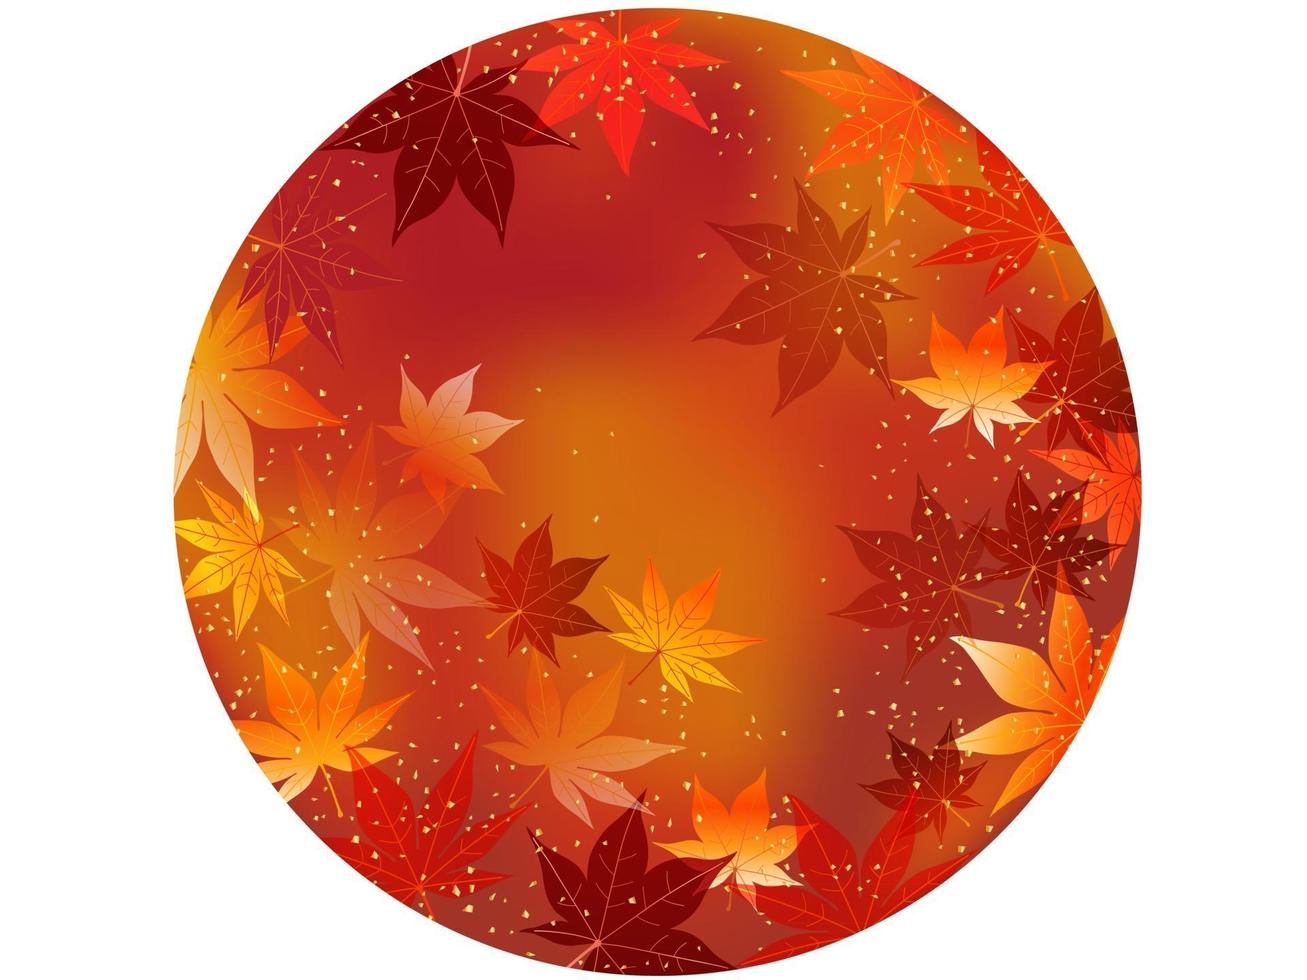 Autumn Maple Leaf Round Vector Background Isolated On A White Background.